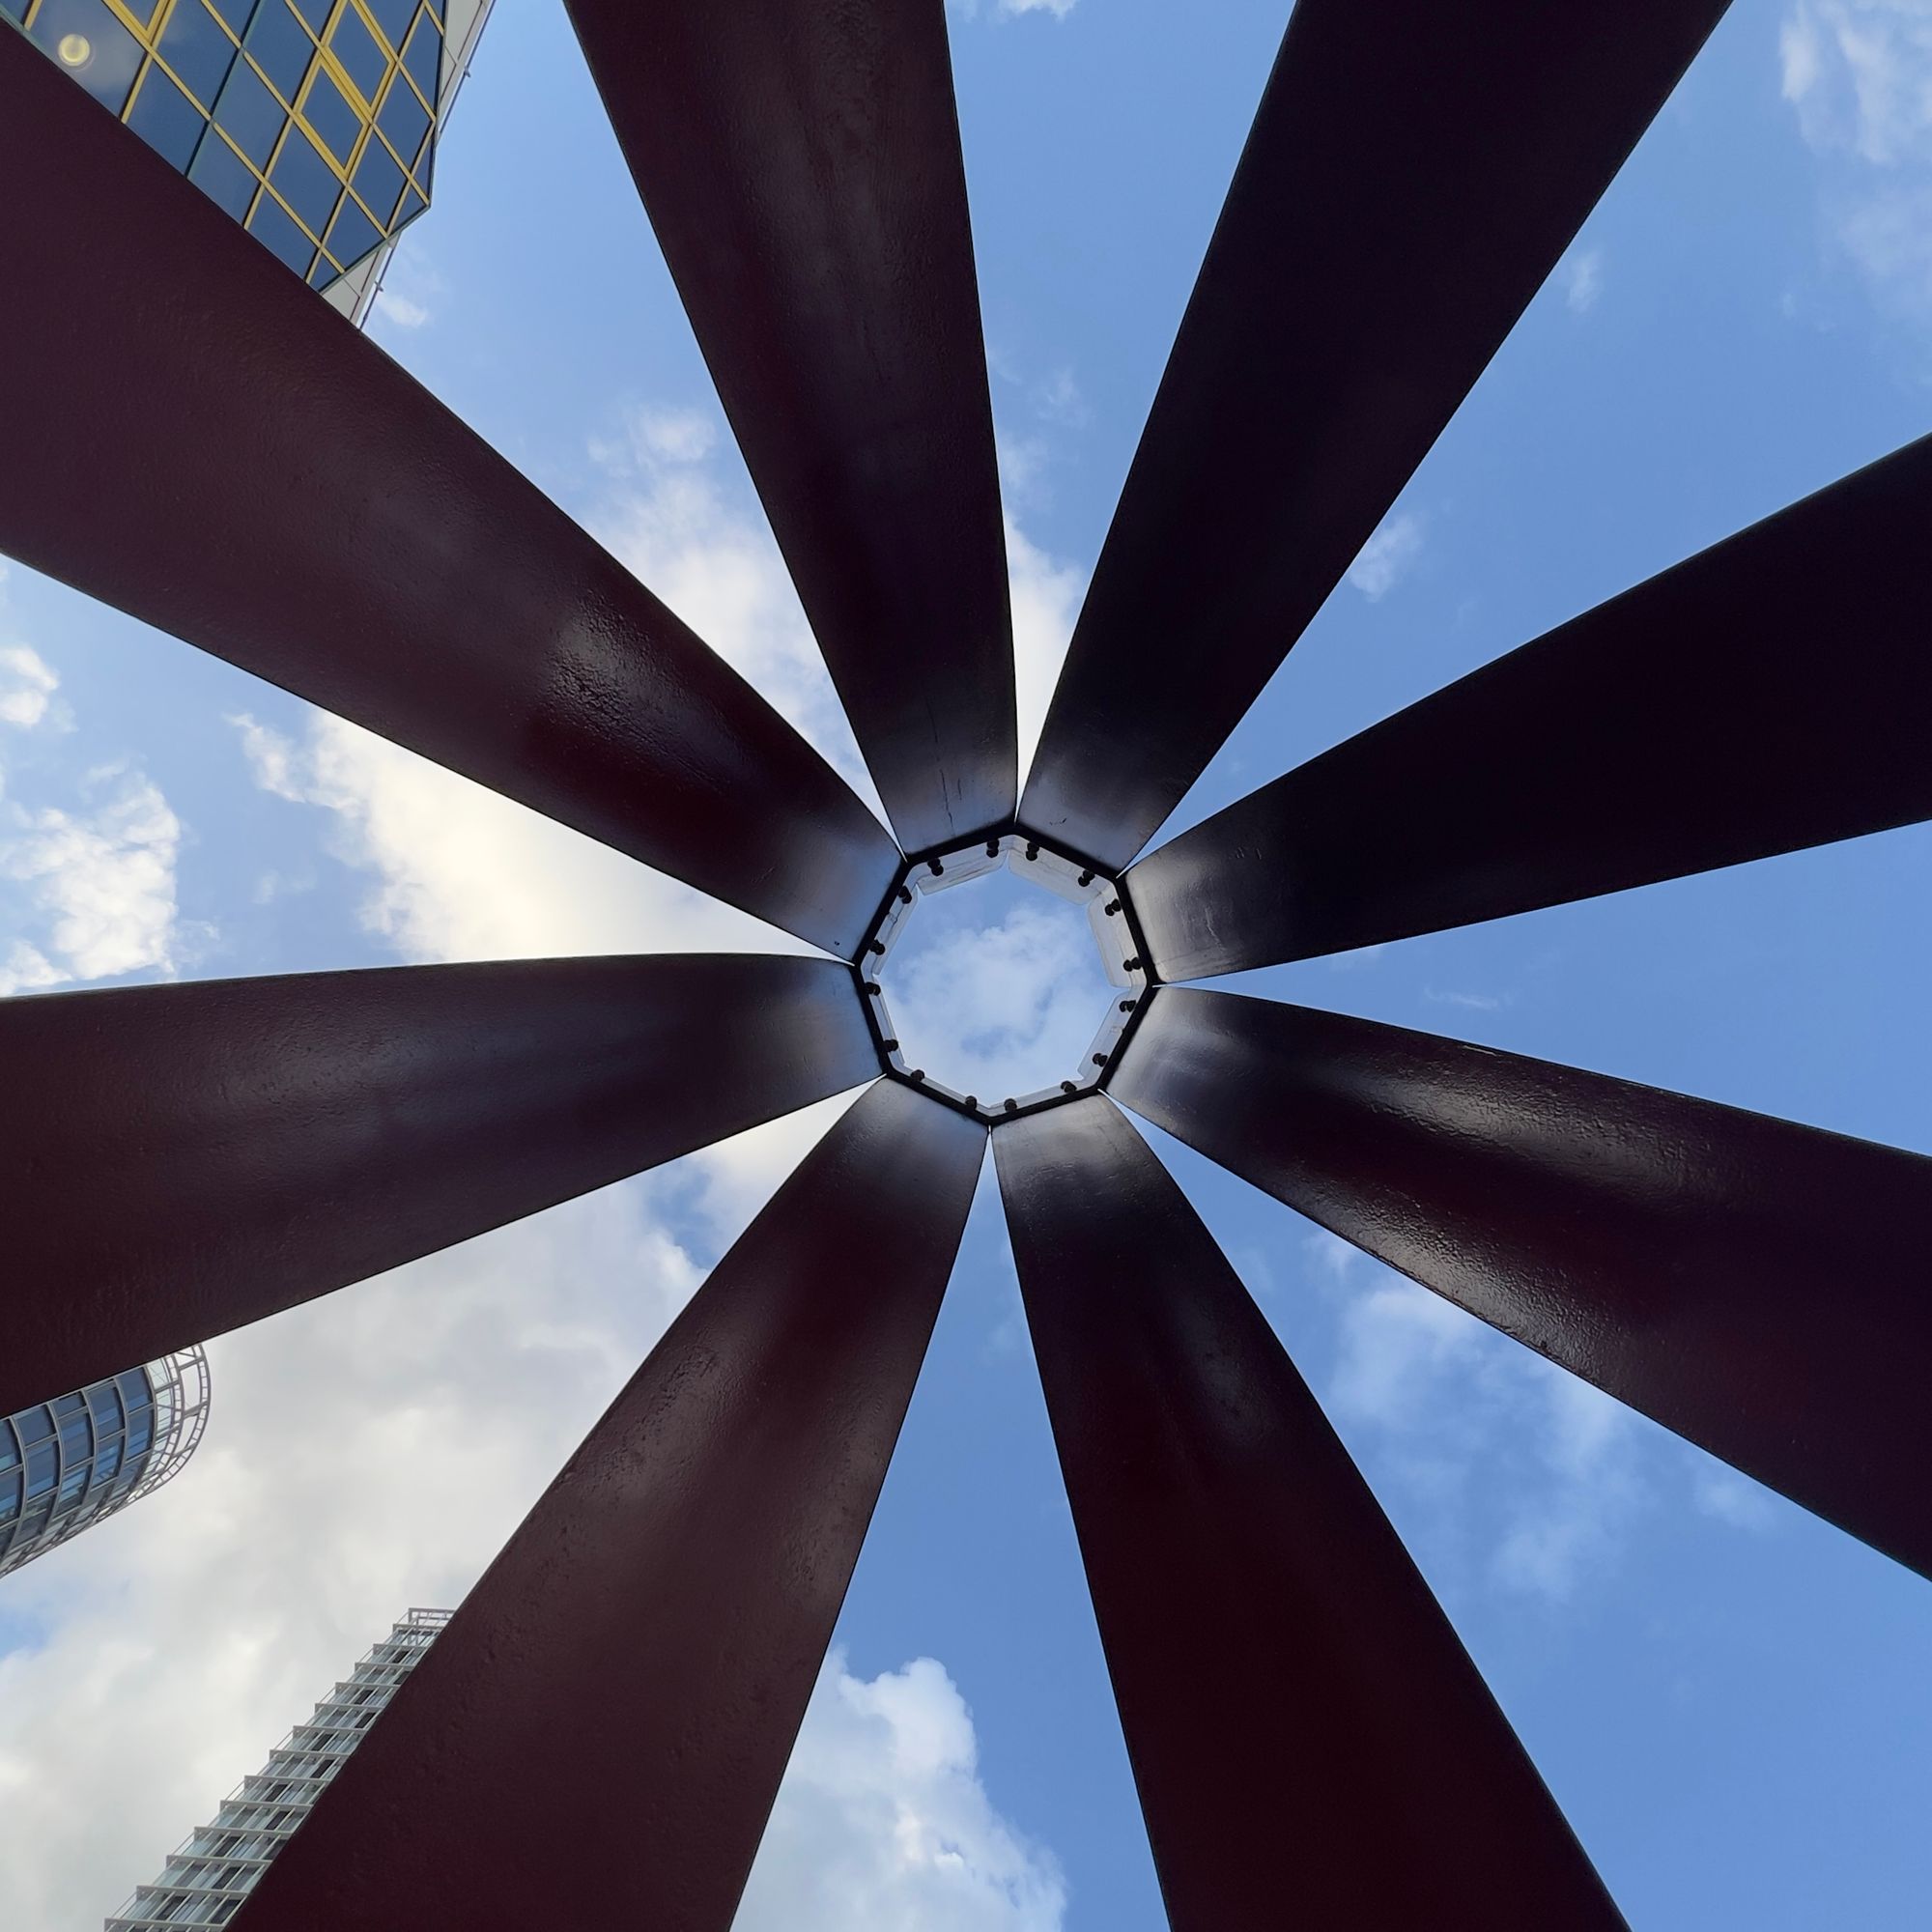 Looking up into a blue, cloudy sky, through the centre of eight rails rising to meet.